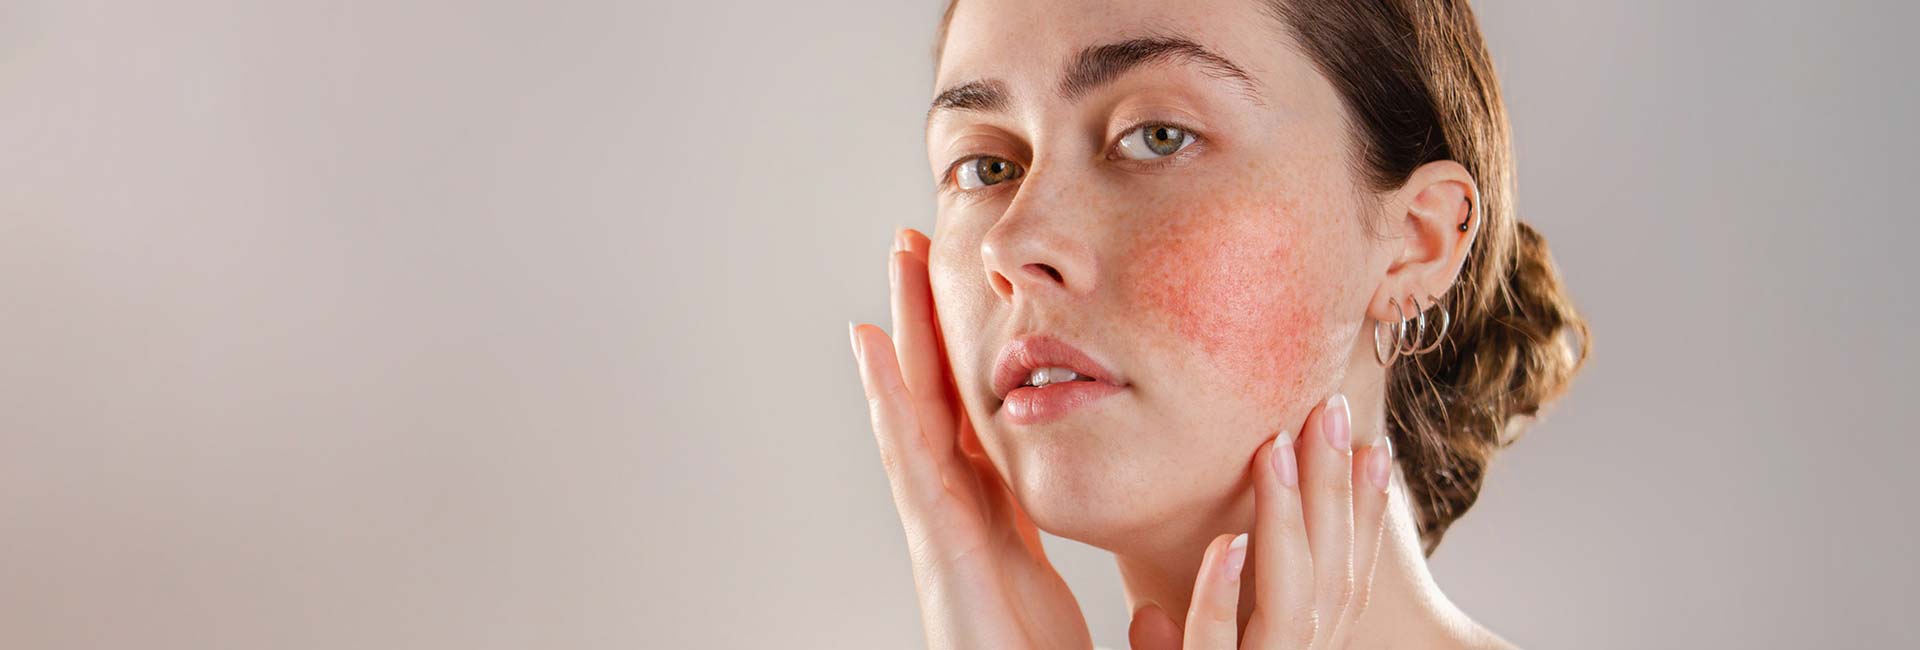 Rosacea and redness